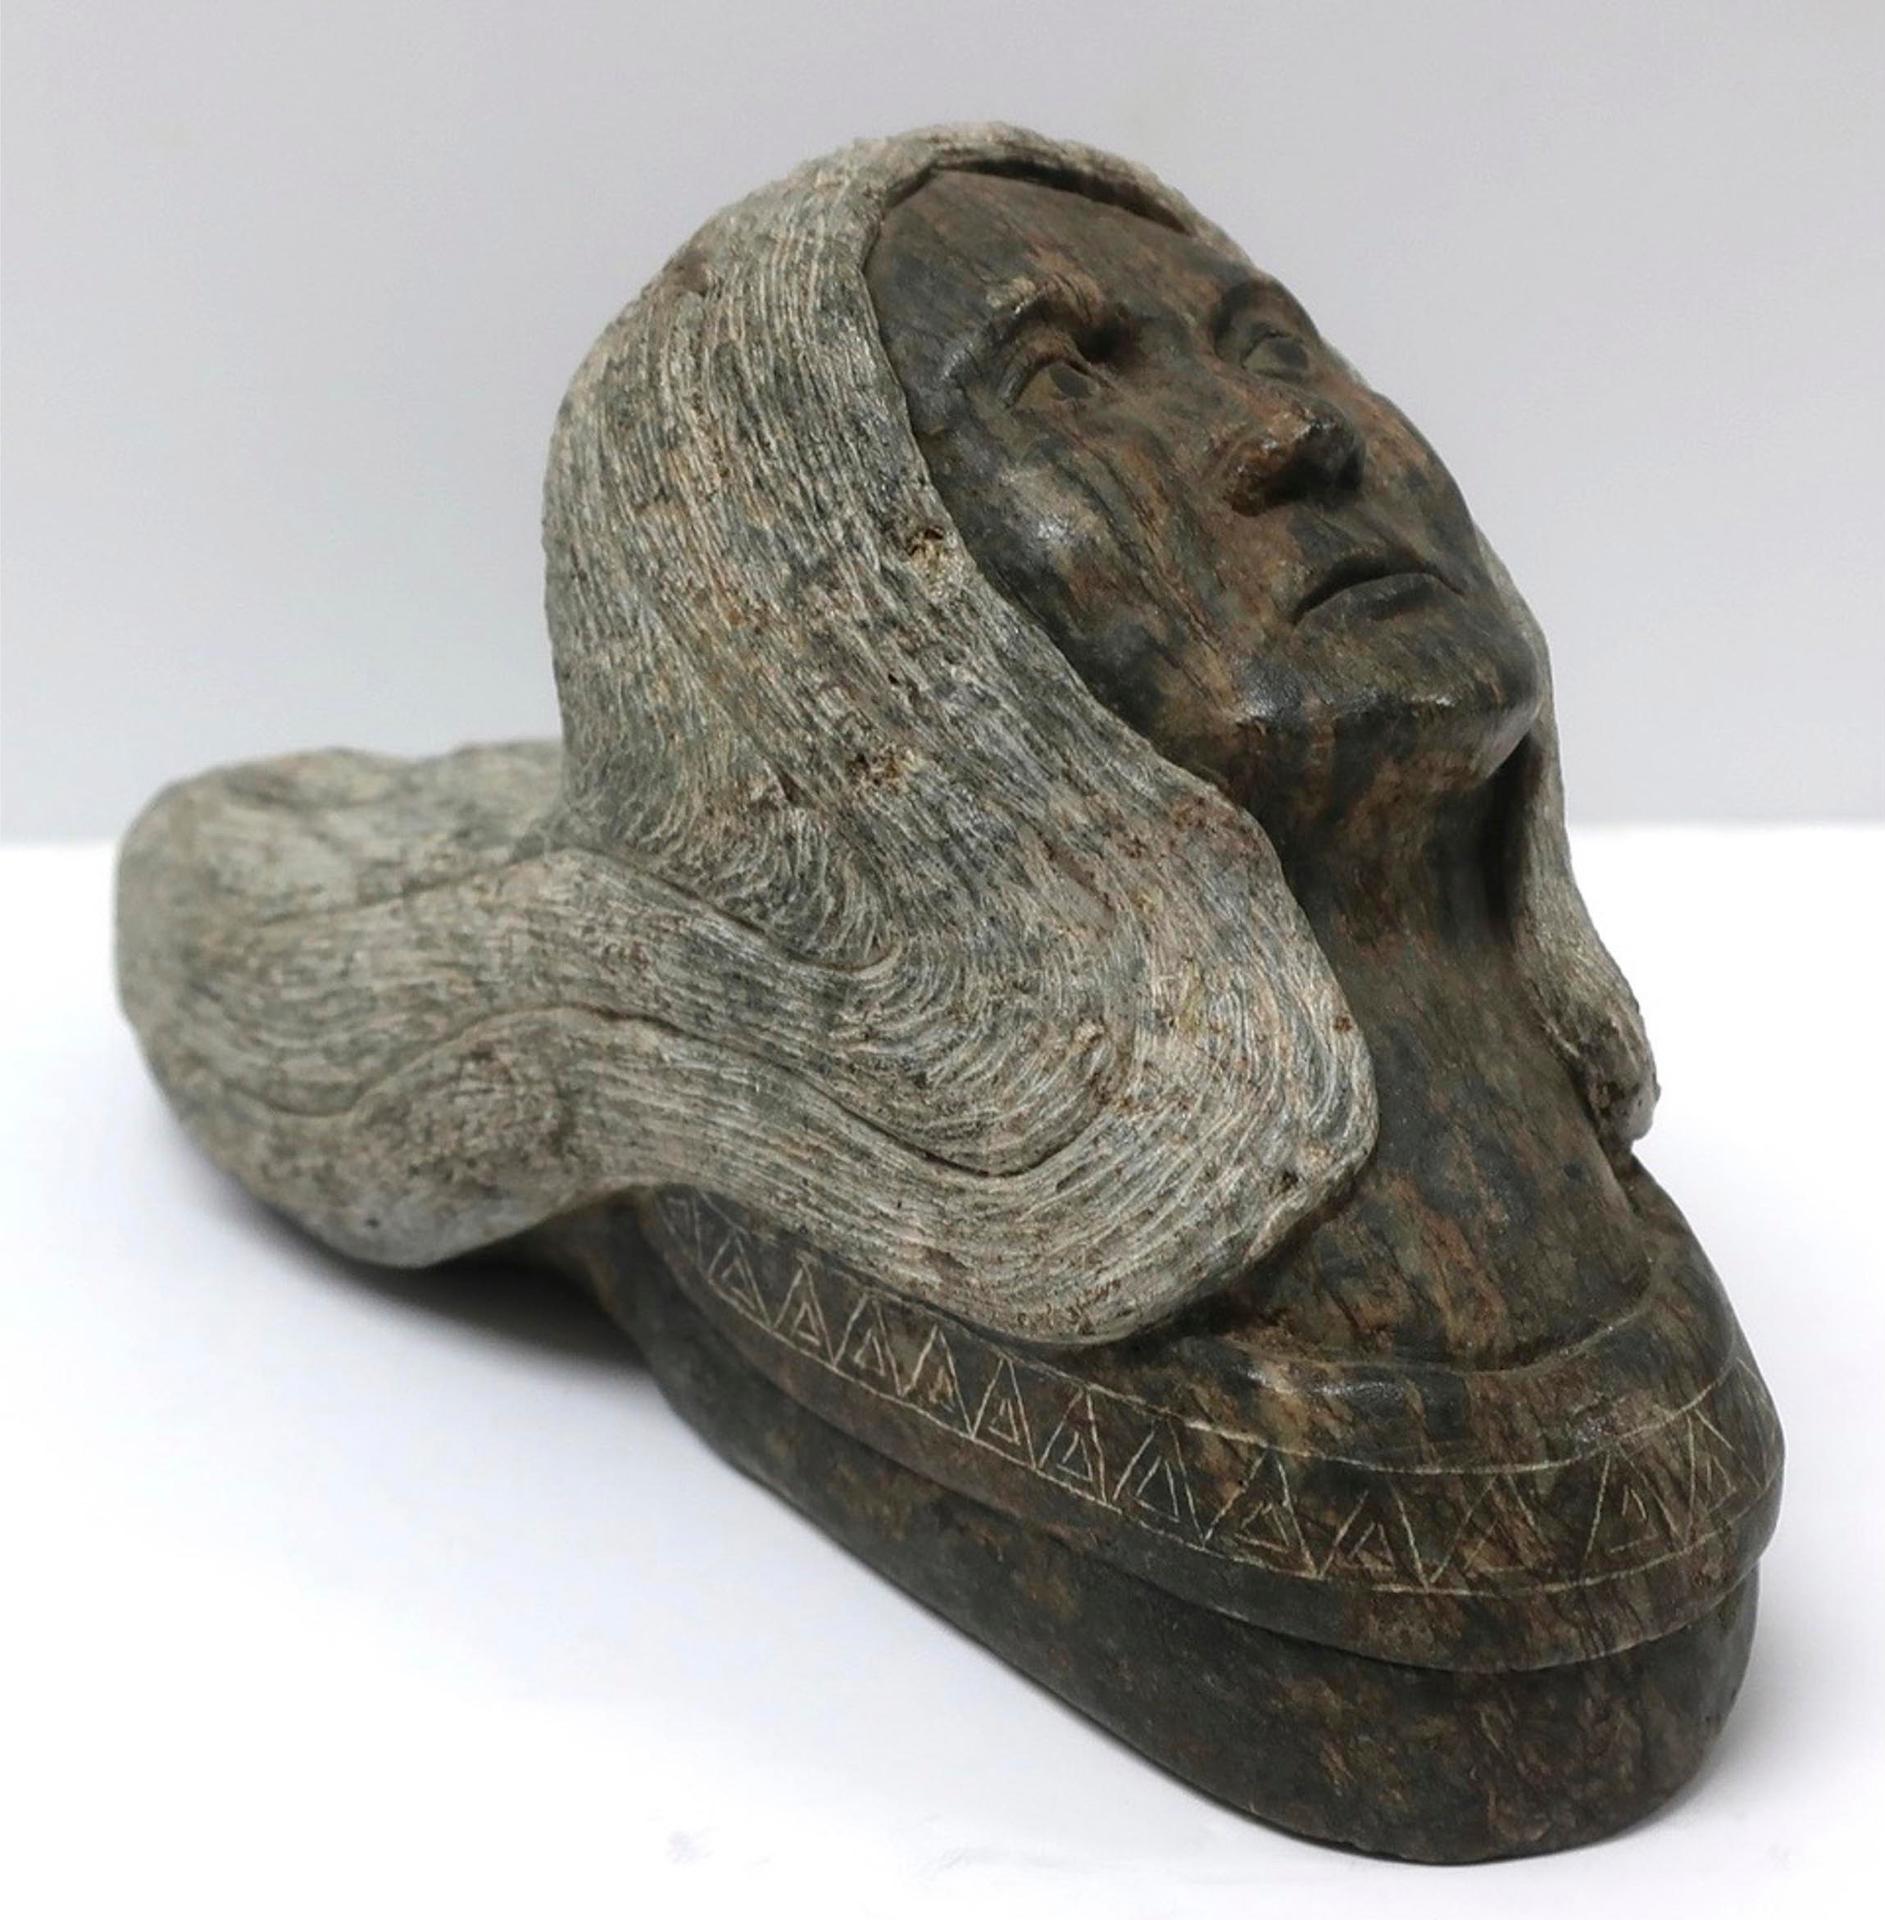 Joseph Jacobs (1934) - Untitled (Head/Moccasin)